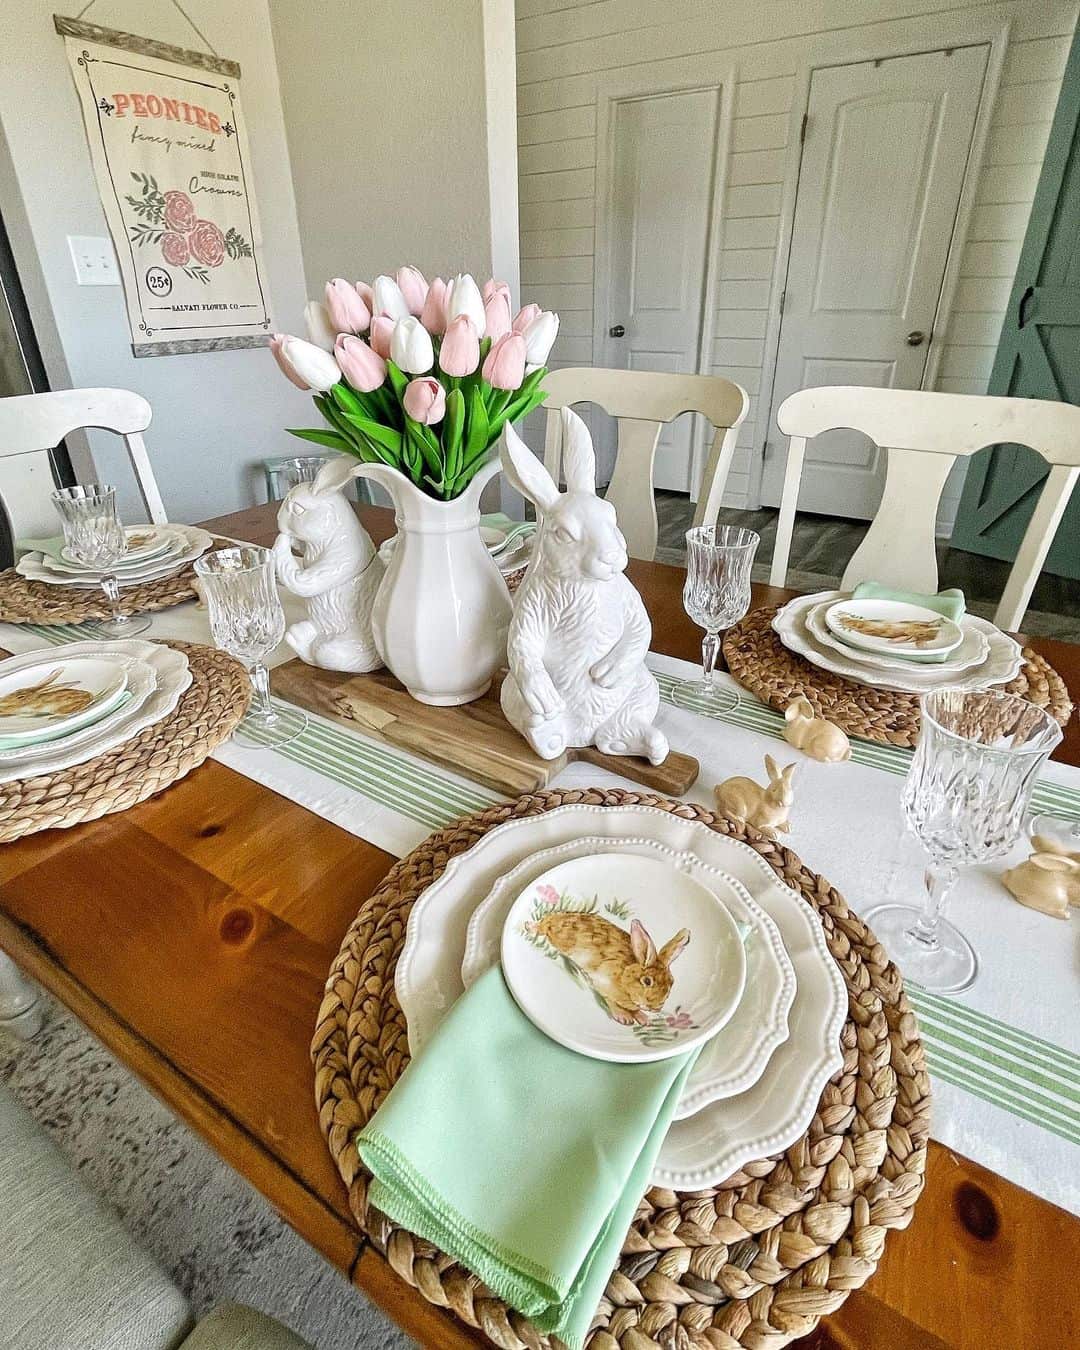 Stained Wood Dining Table With Easter Tableware - Soul & Lane